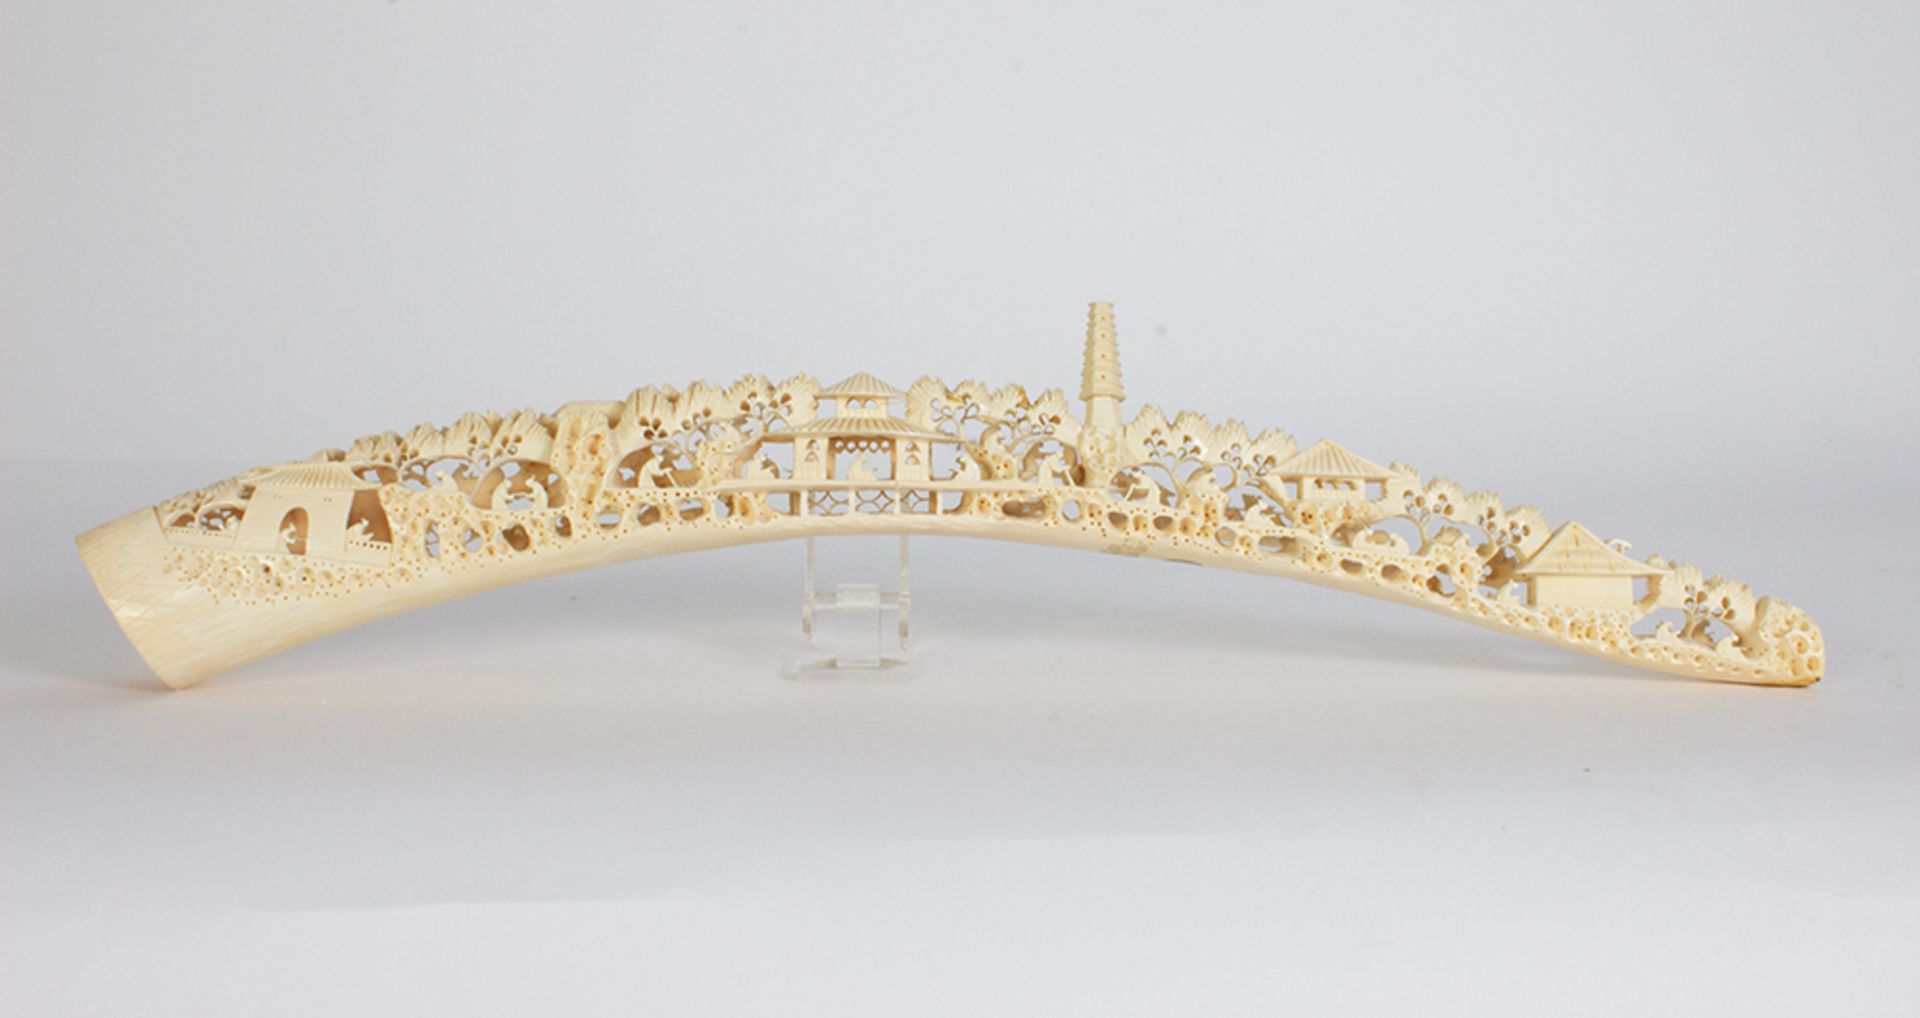 Ivory tusk carved with passage motifs.